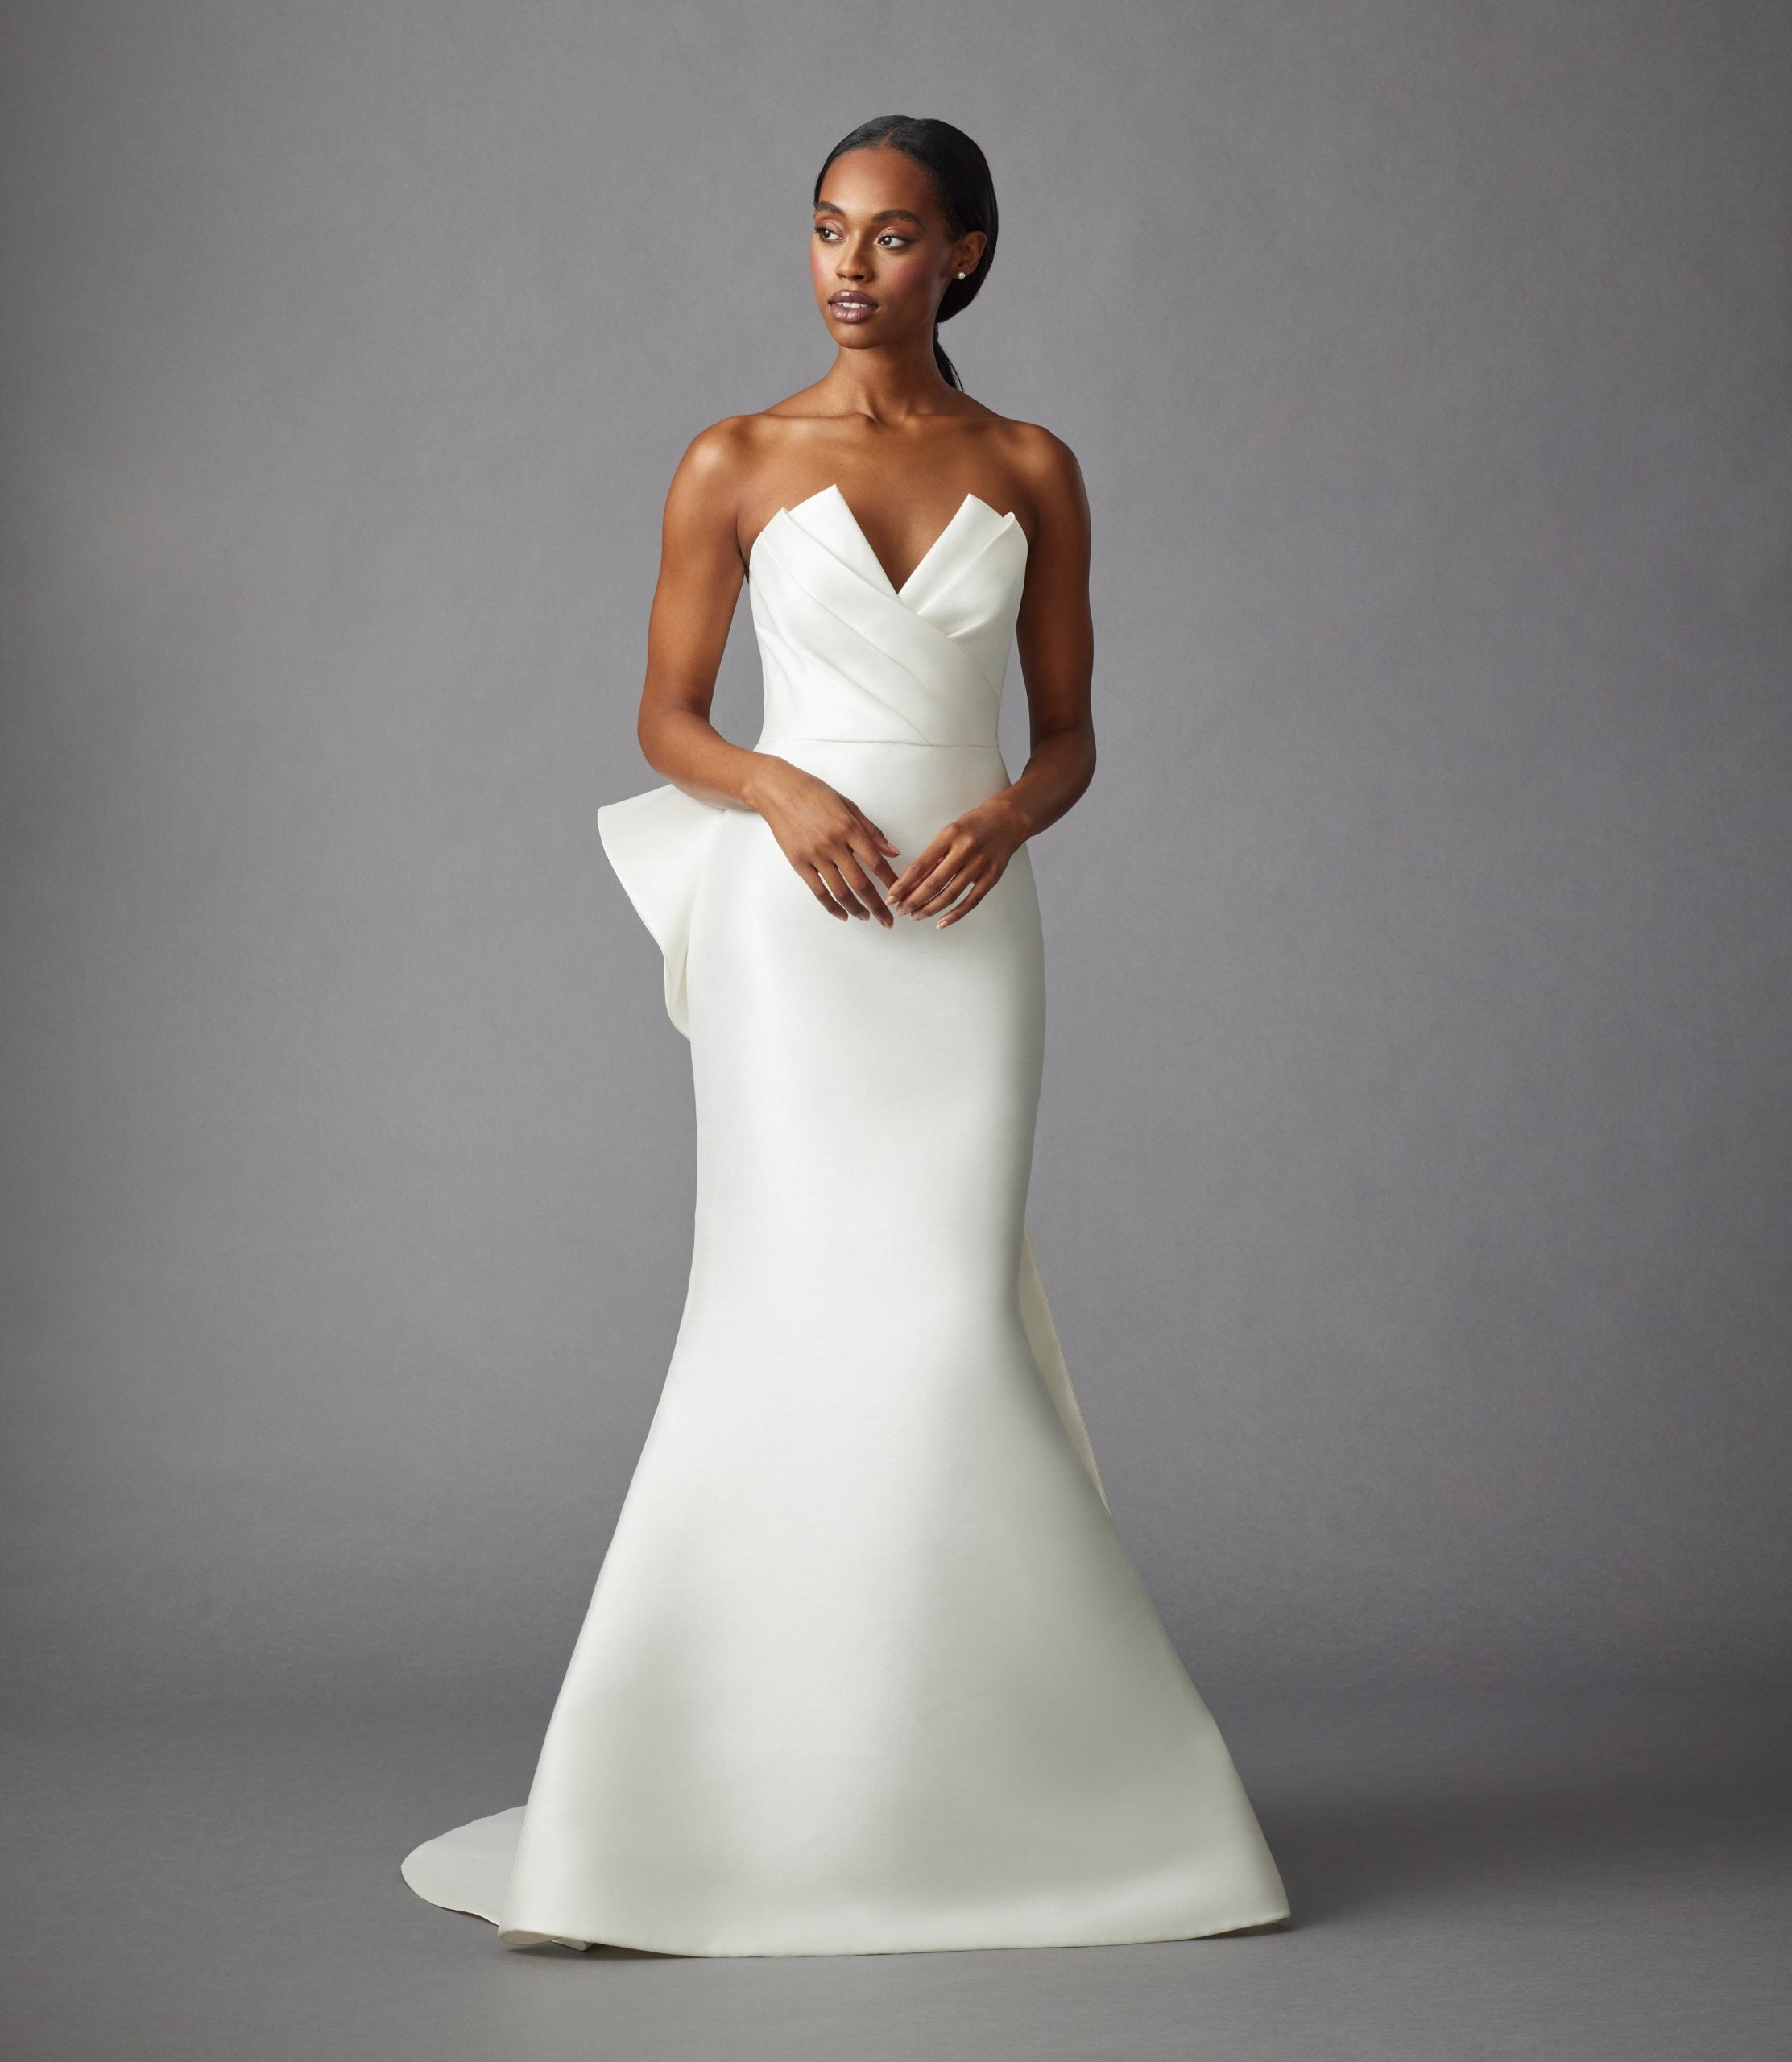 Strapless Fit And Flare Wedding Dress With Detachable Overskirt by Allison Webb - Image 1